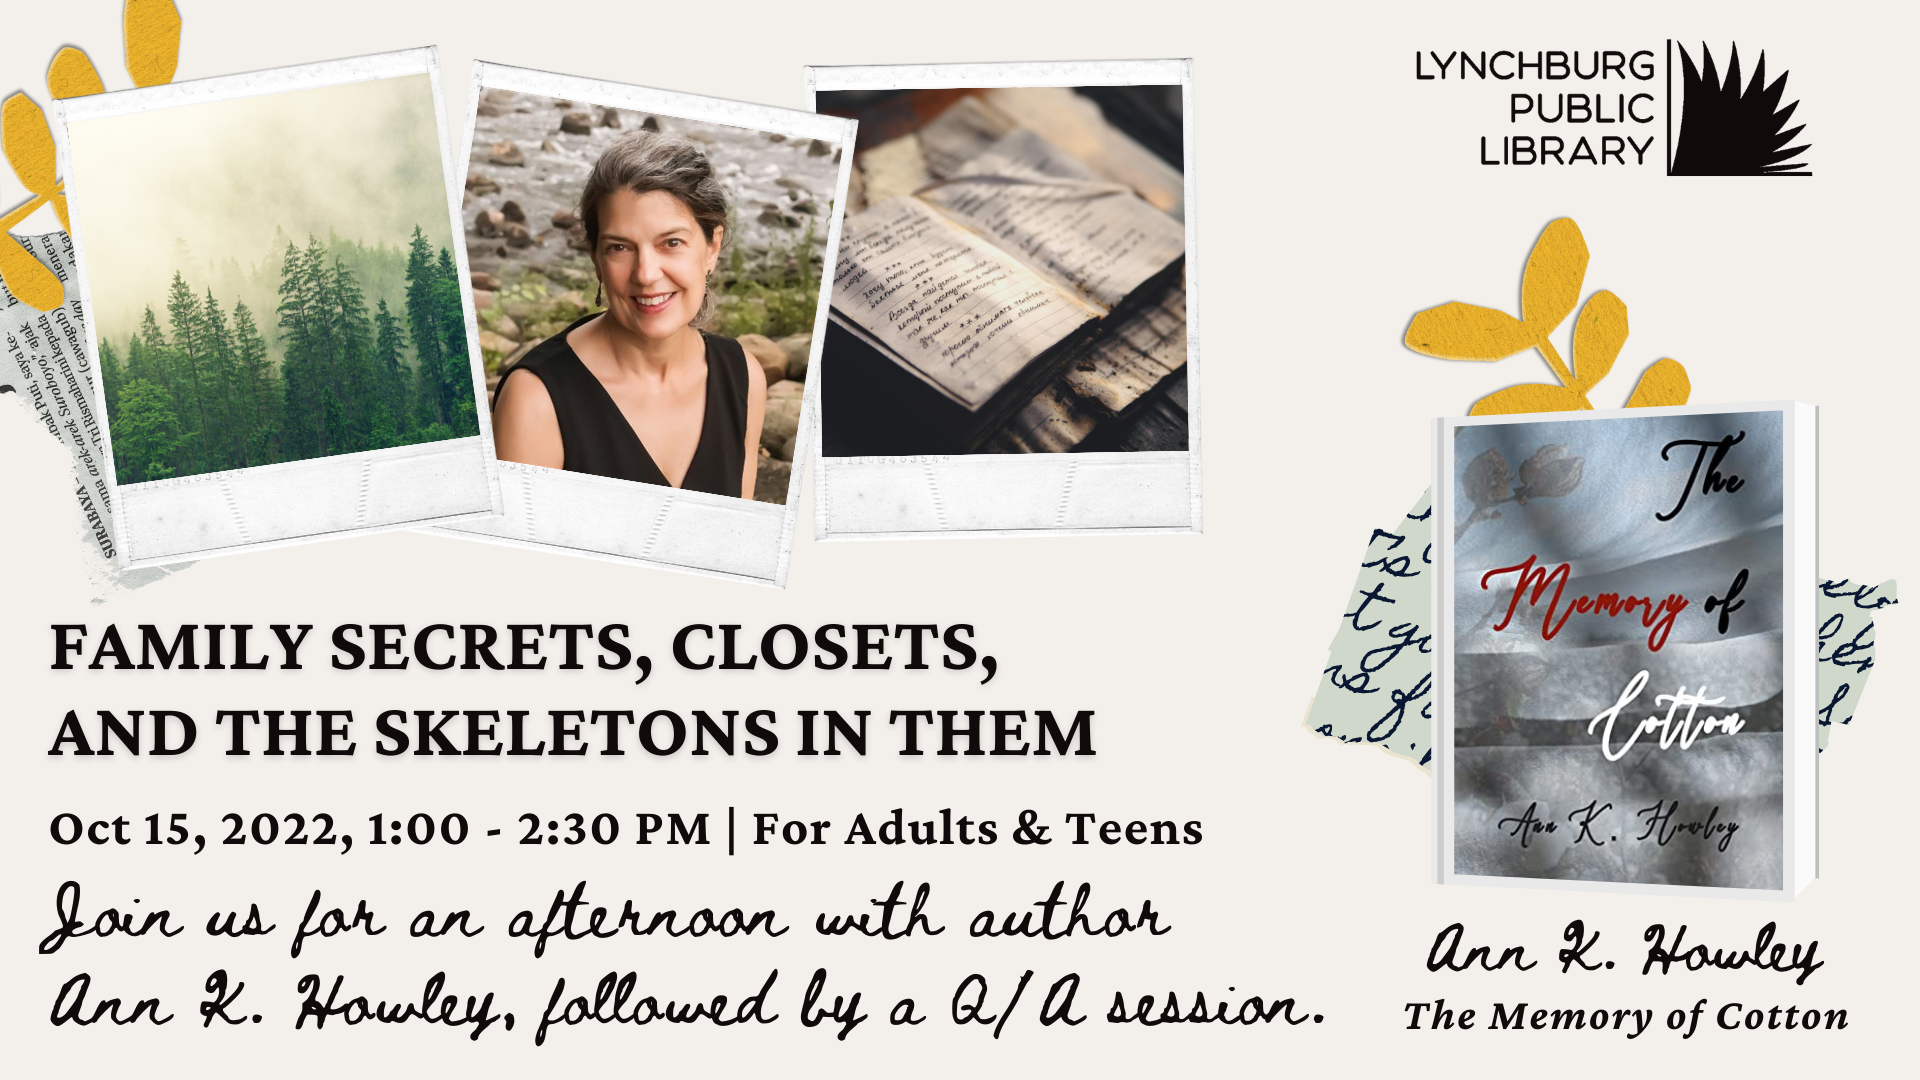 Family Secrets, Closets, and the Skeletons in Them: Author Talk with Ann K. Howley 